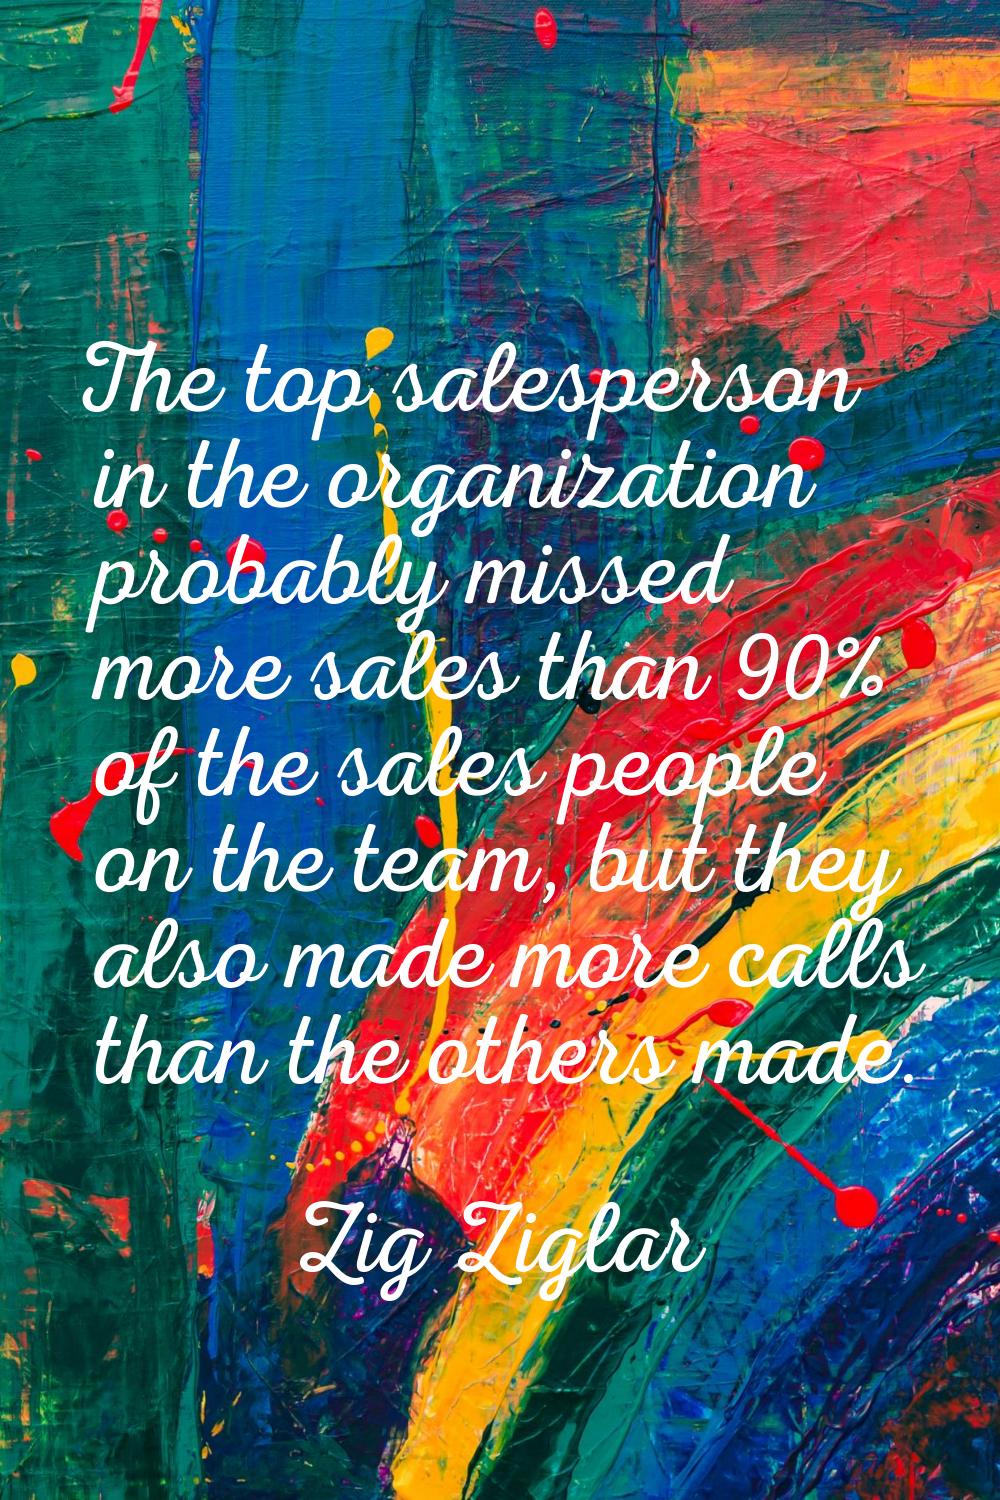 The top salesperson in the organization probably missed more sales than 90% of the sales people on 